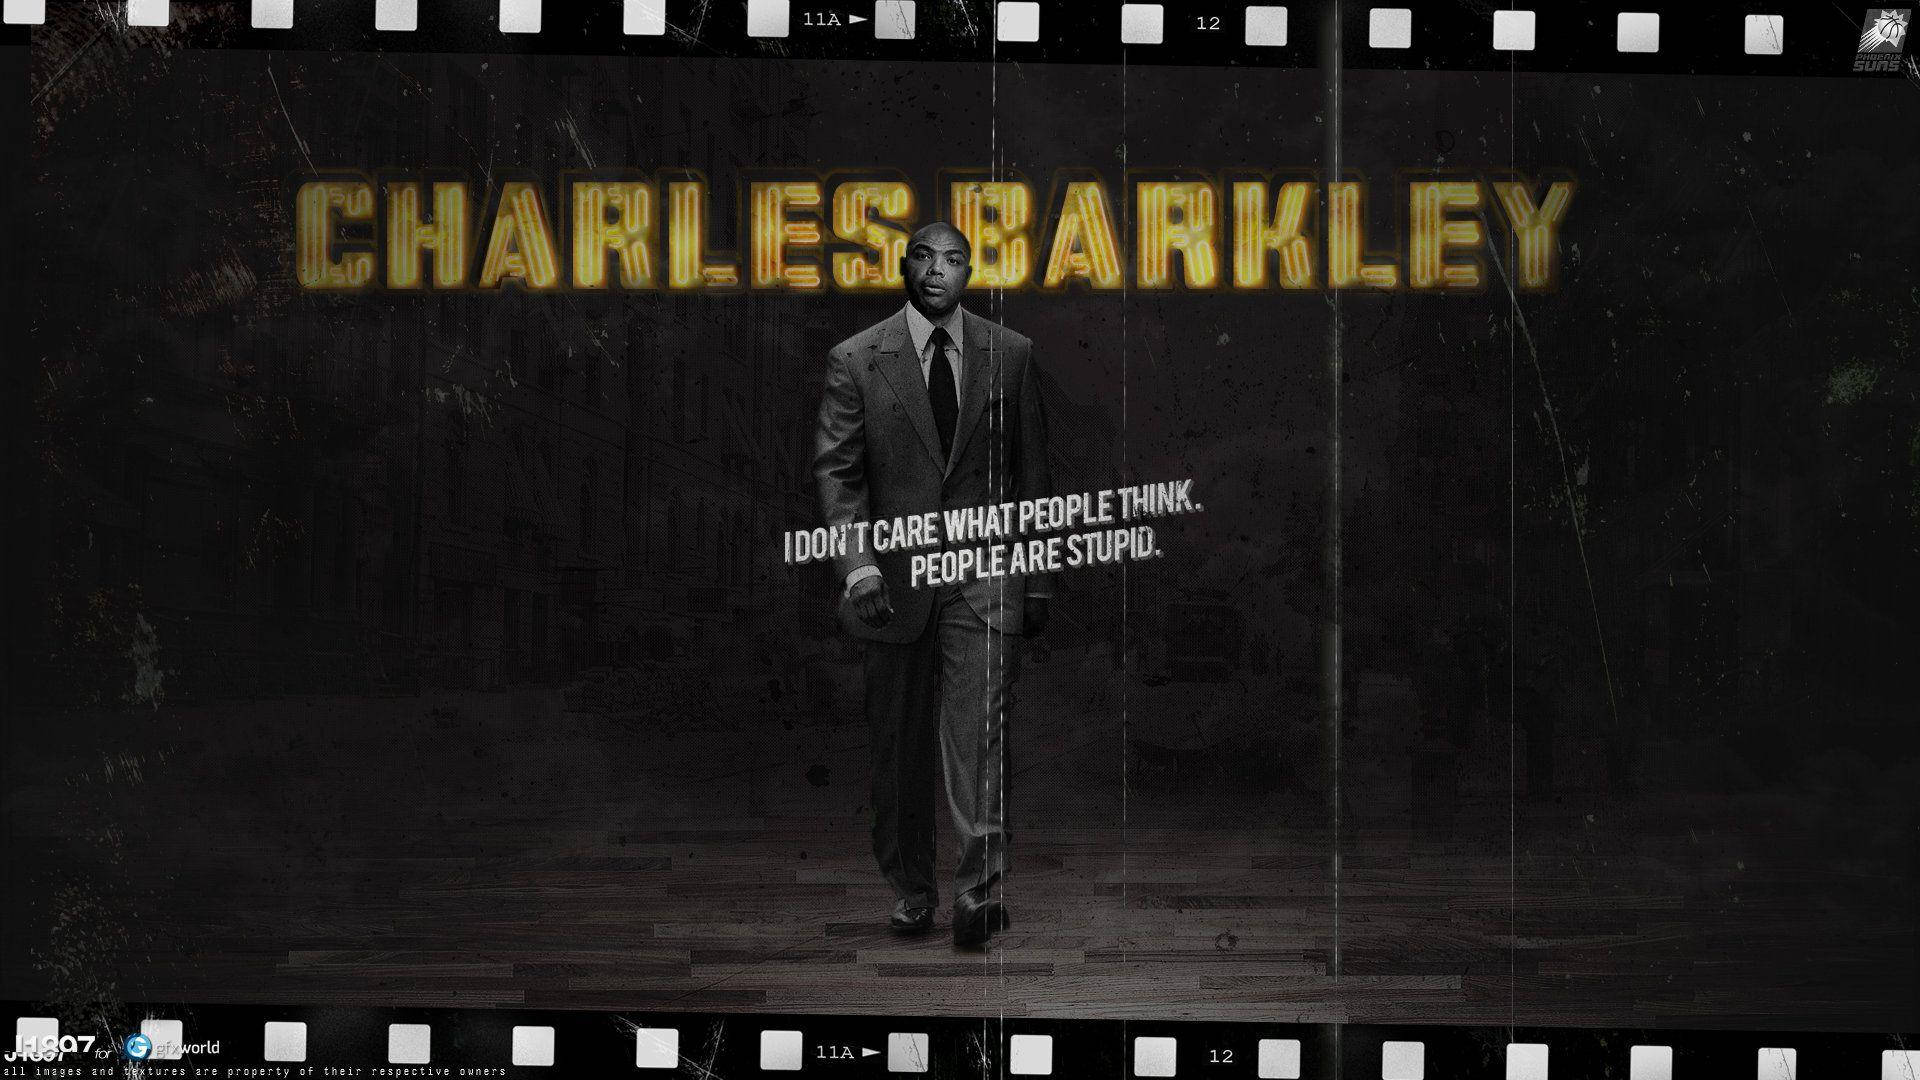 Charles Barkley Basketball Player Quote Wallpaper